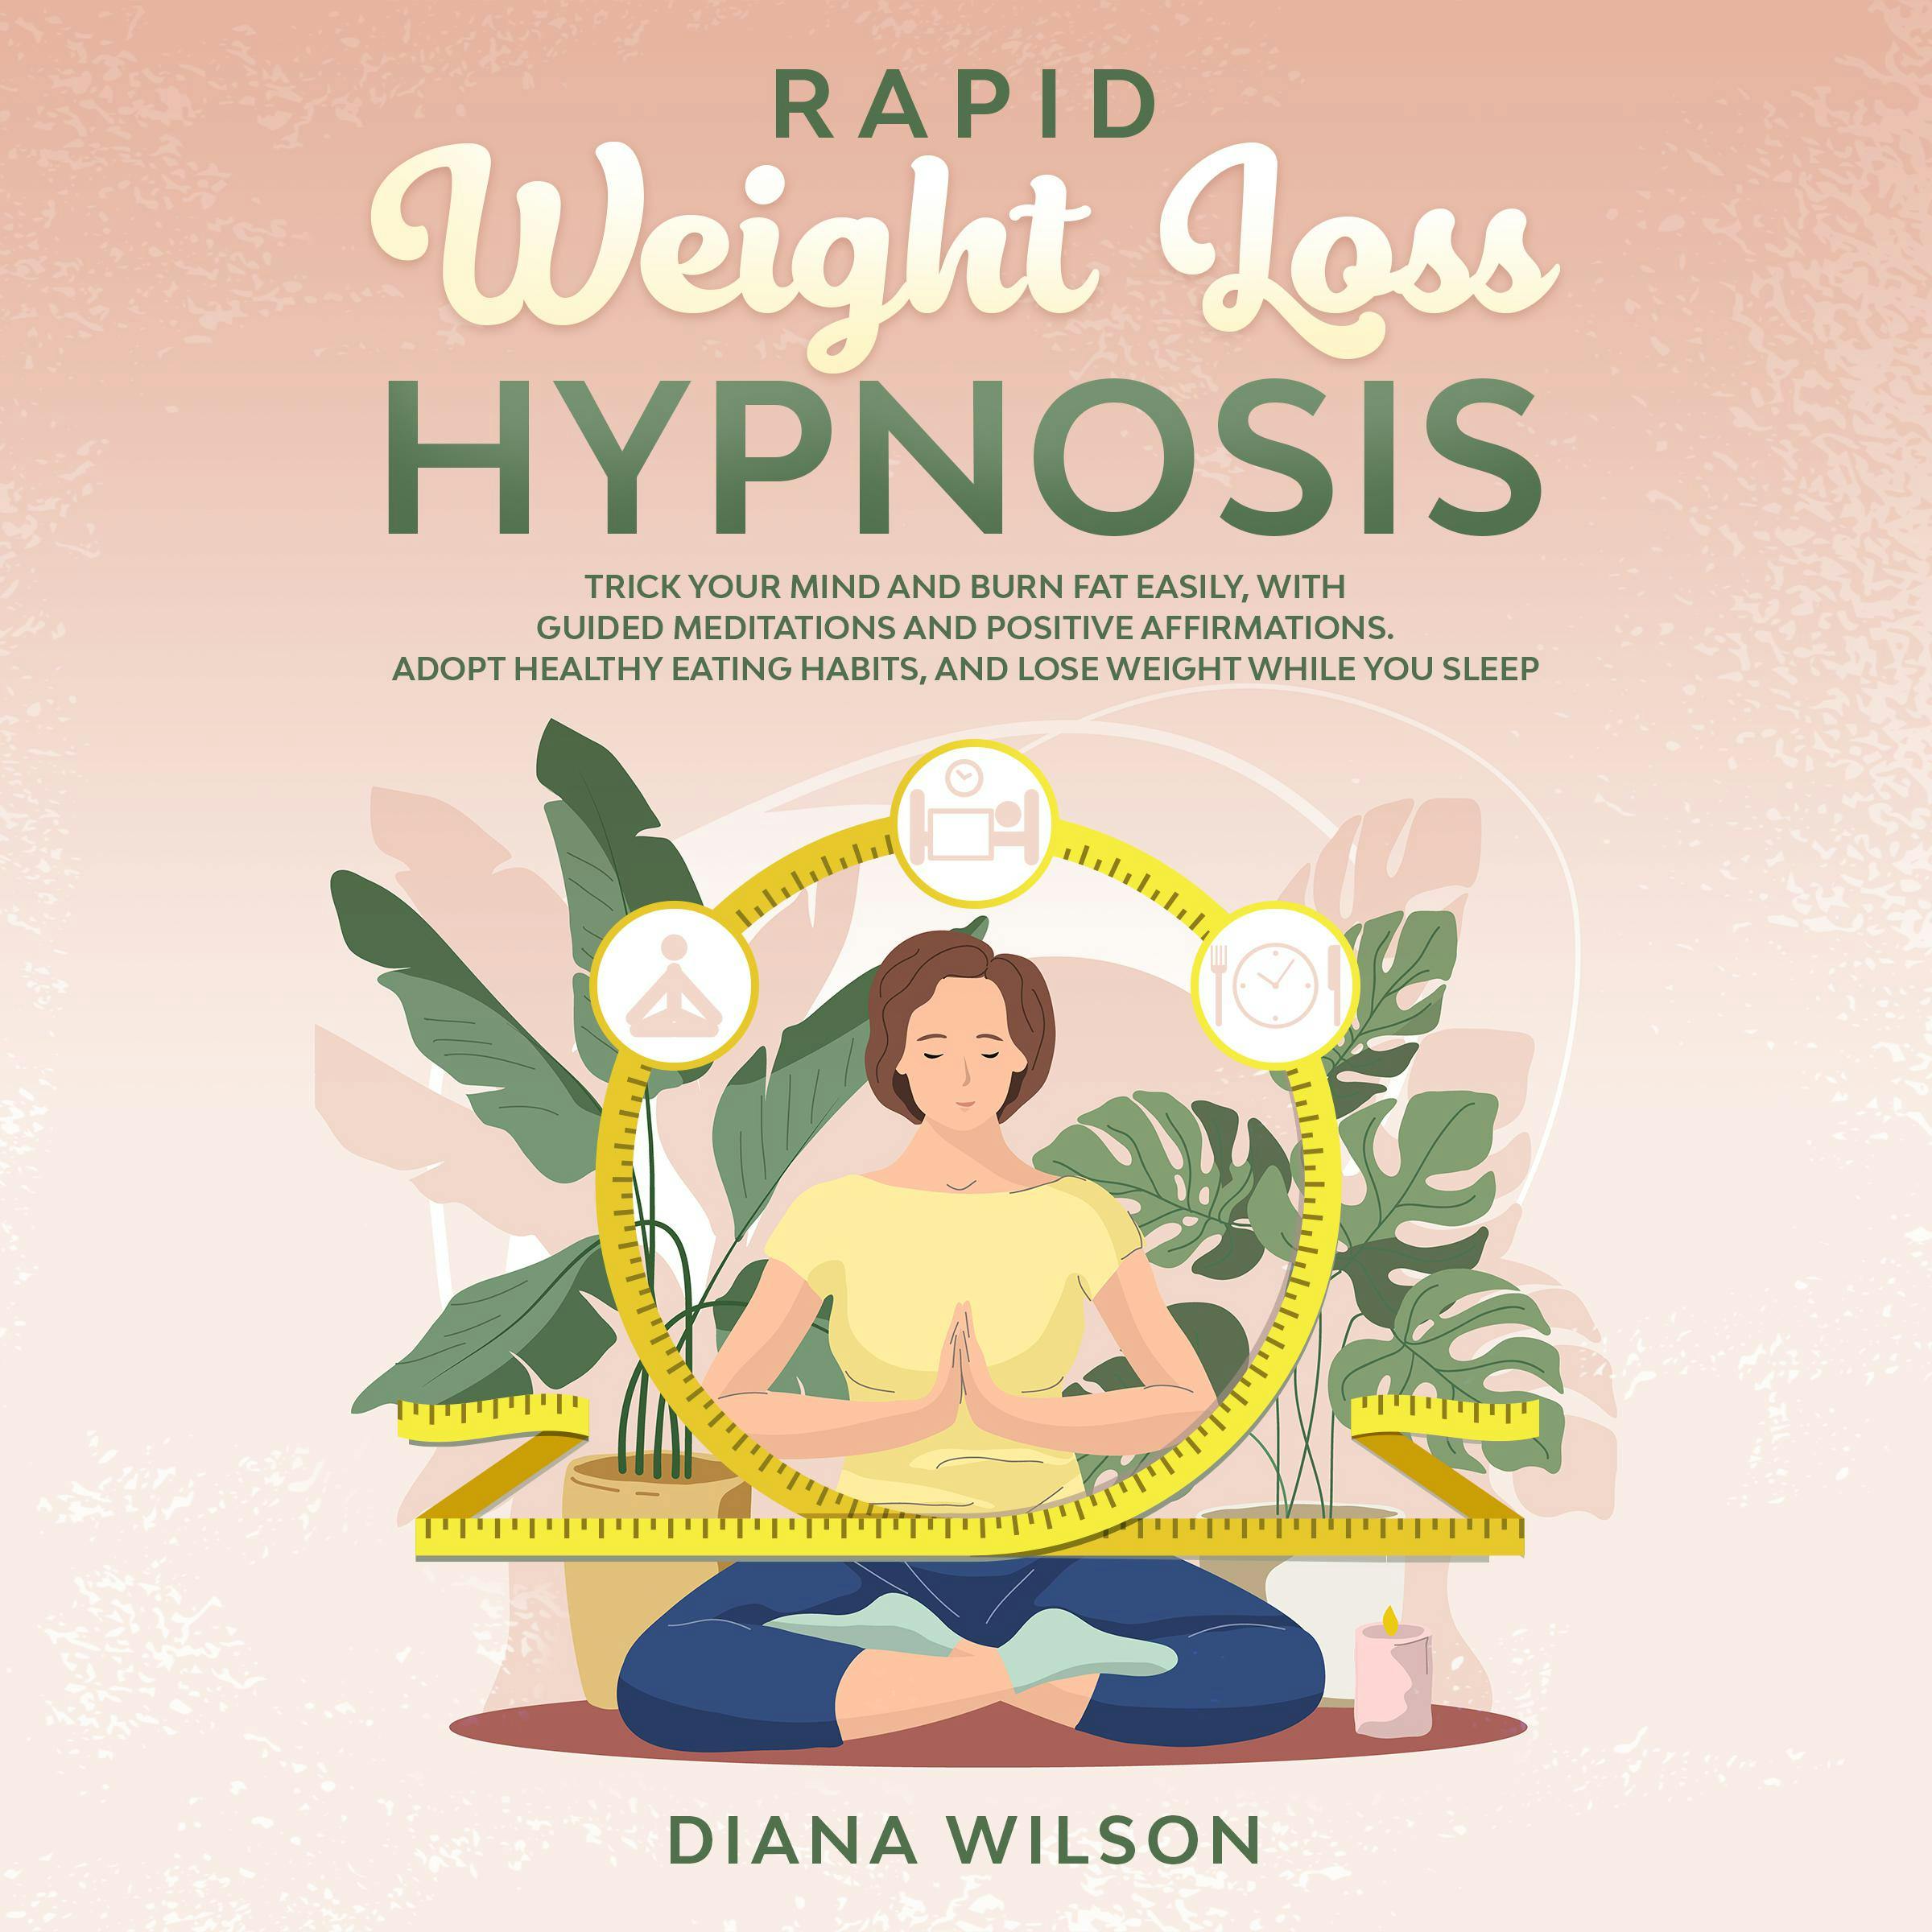 Rapid Weight Loss Hypnosis: Trick Your Mind and Burn Fat Easily,  with Guided Meditations and Positive  Affirmations. Adopt Healthy Eating Habits,  and Lose Weight While You Sleep - undefined